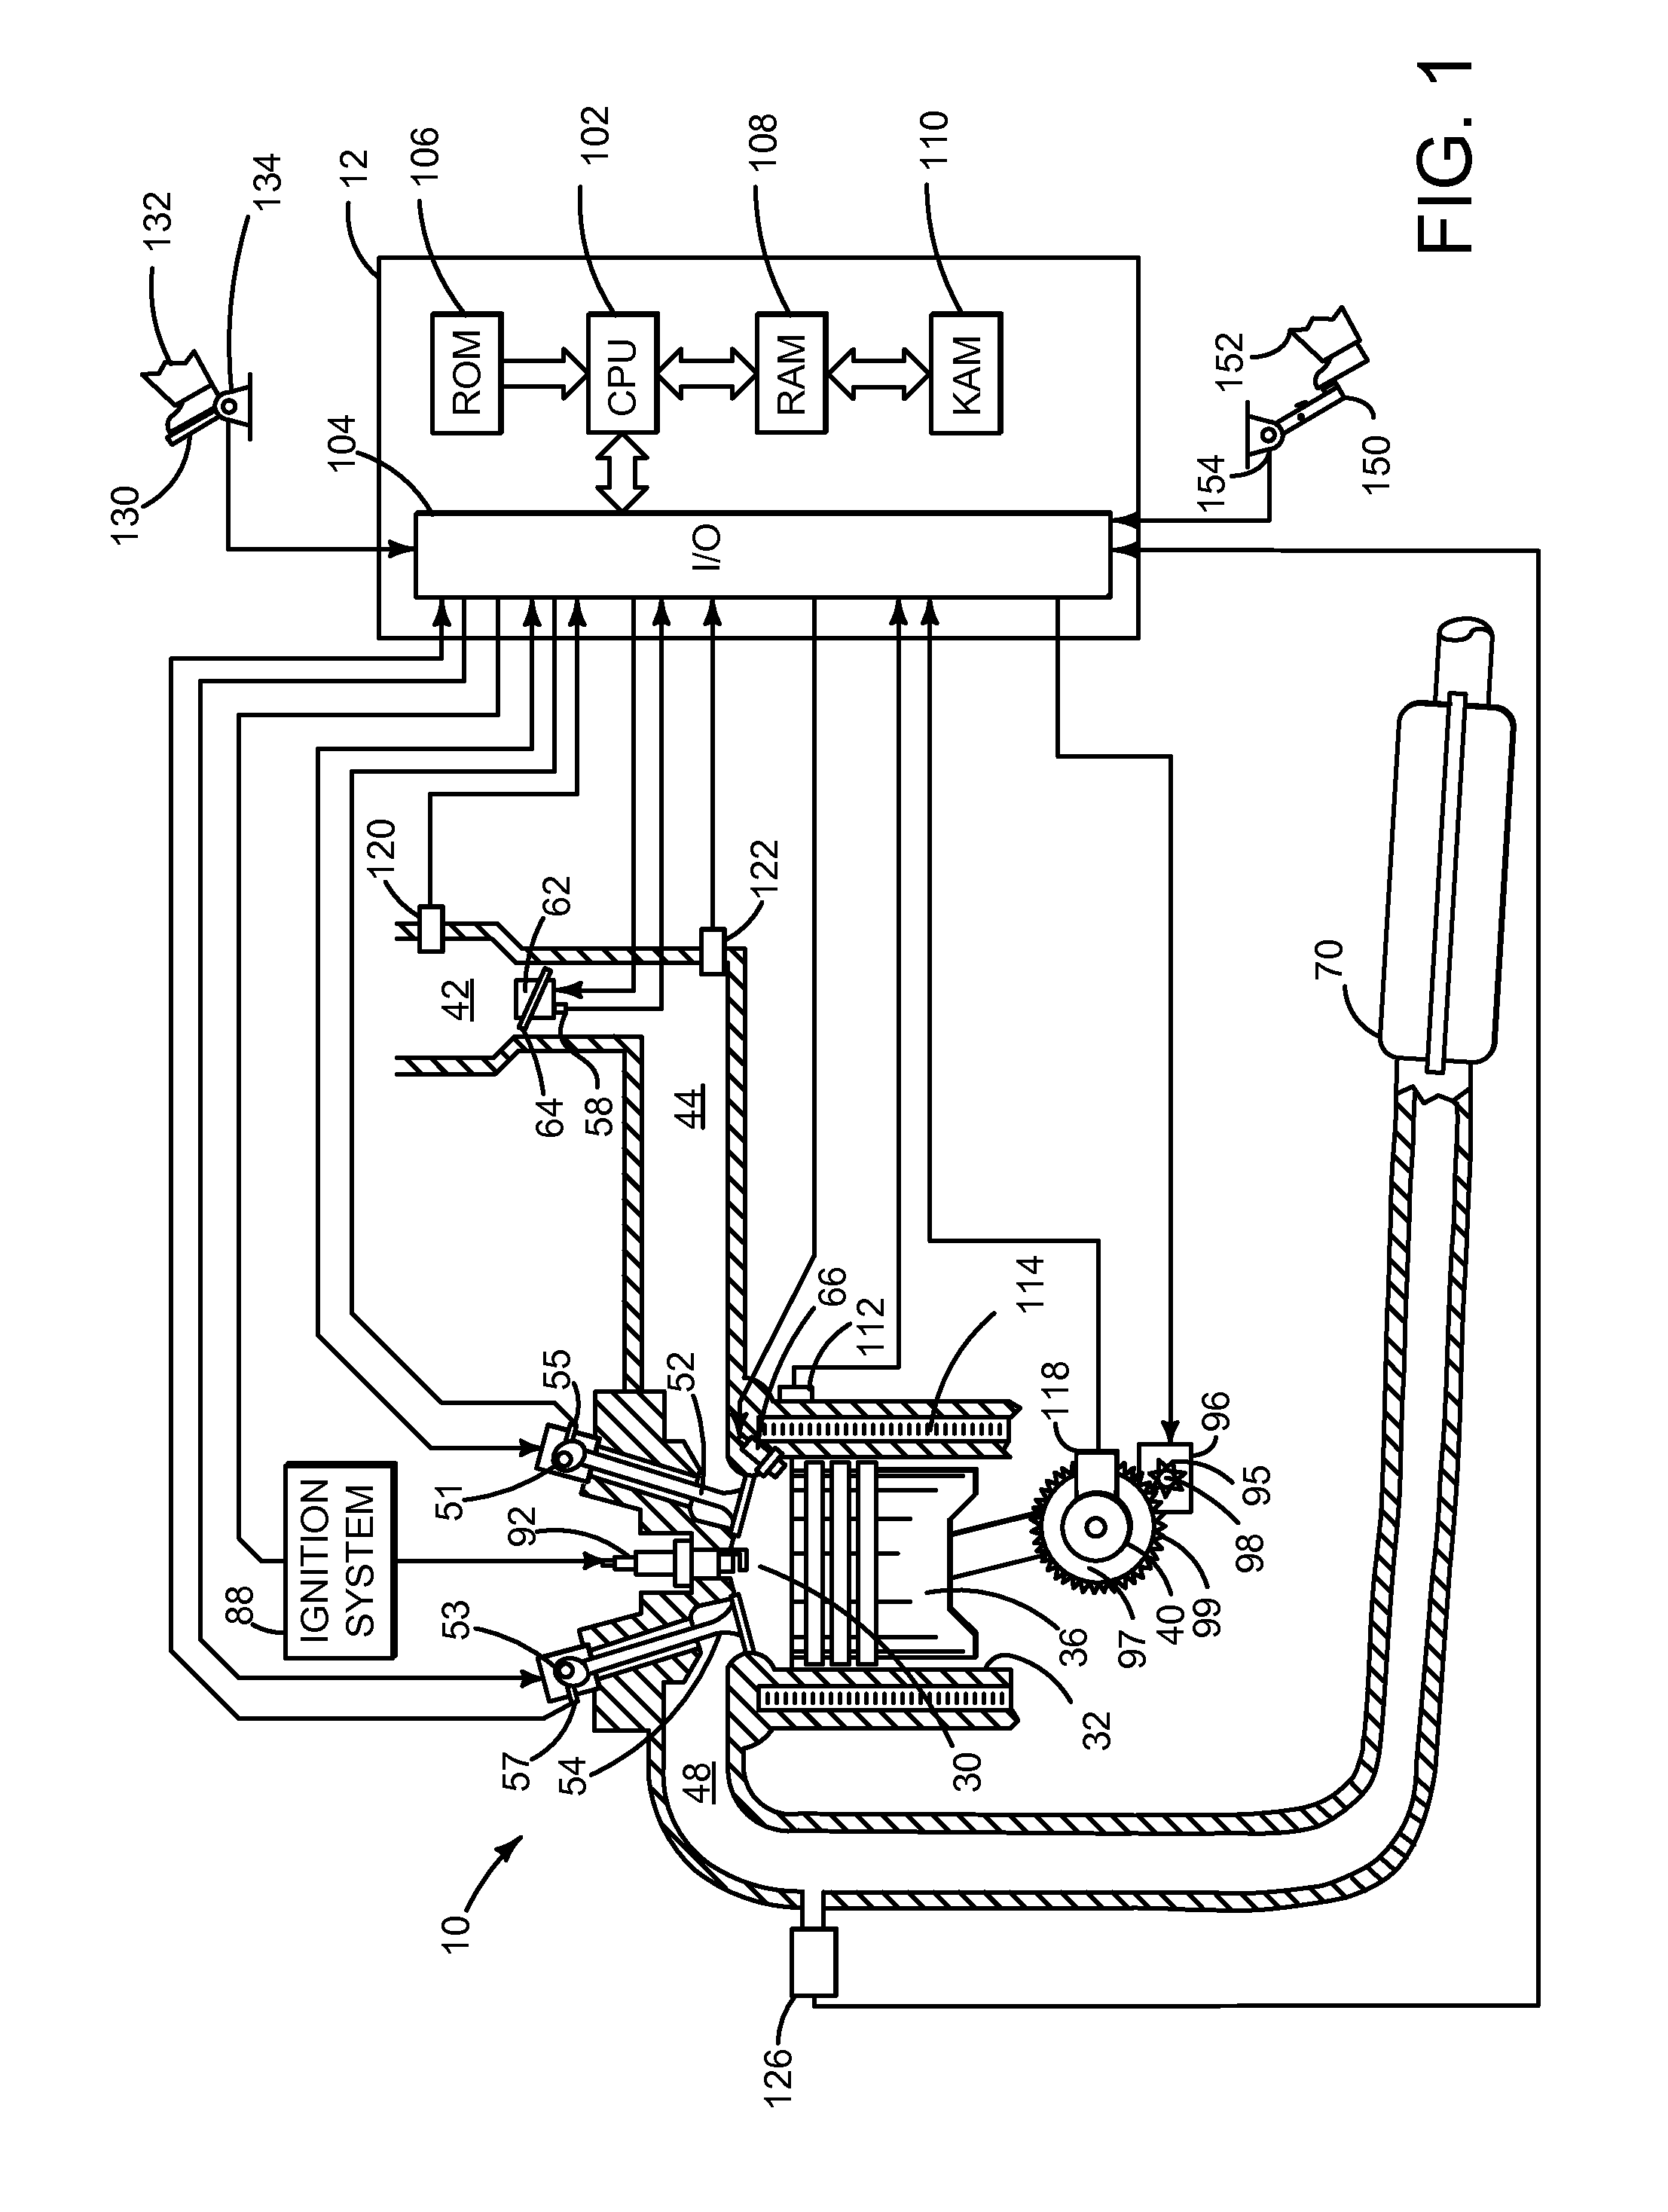 Methods and systems for selectively adapting engine air flow